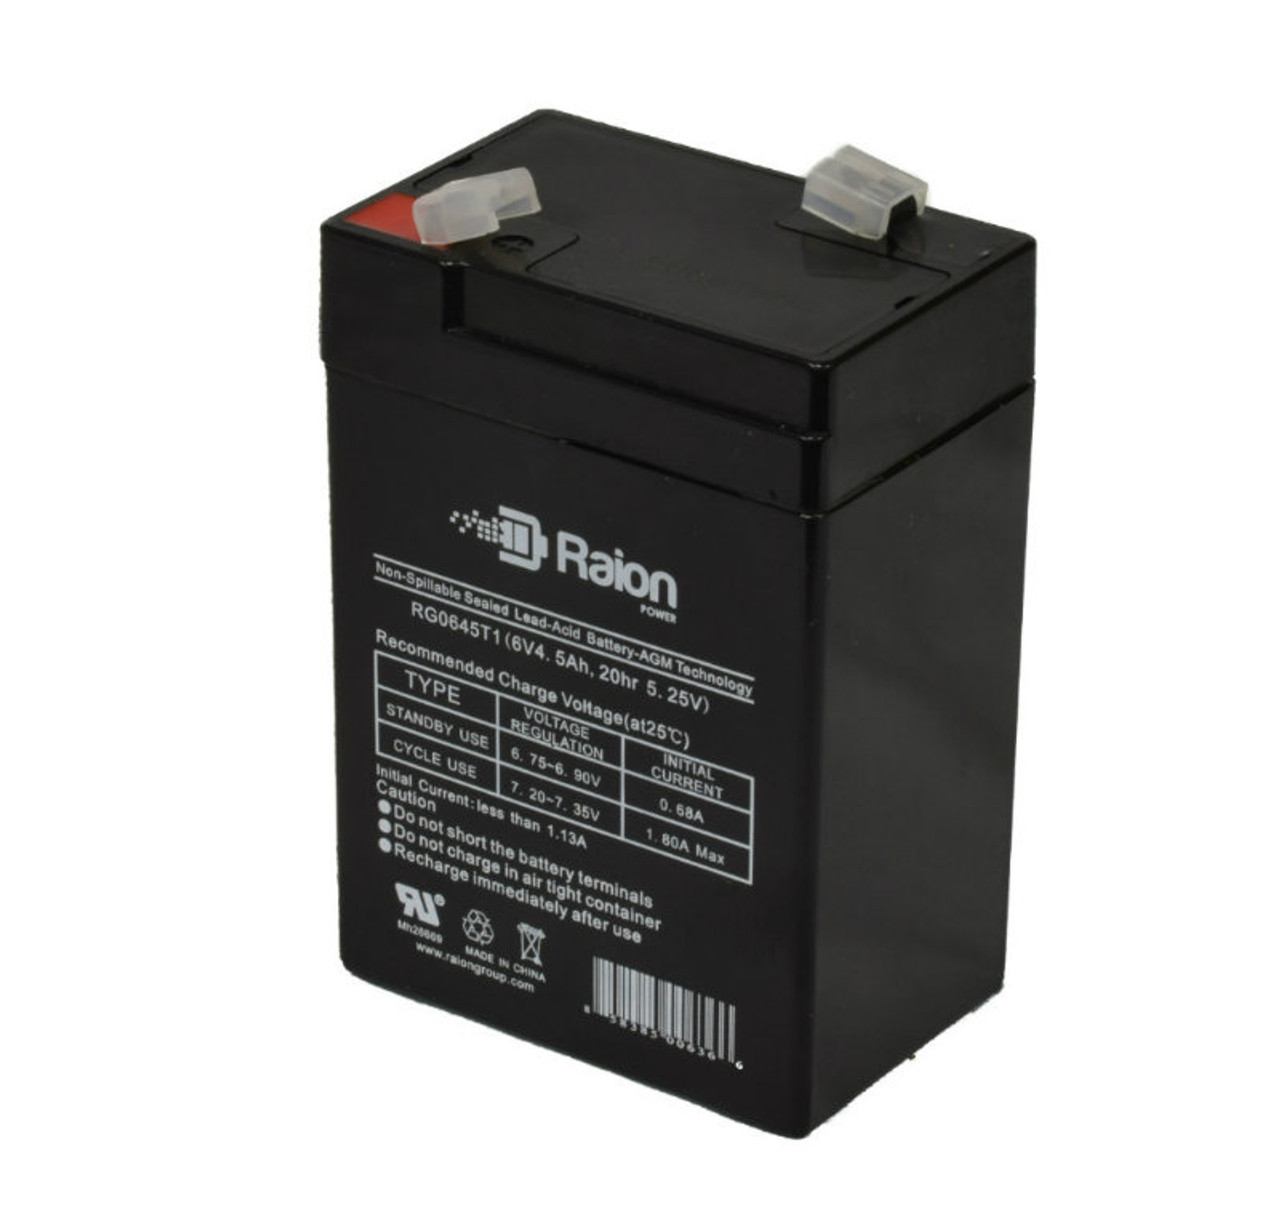 Raion Power RG0645T1 6V 4.5Ah Replacement Battery Cartridge for Dual-Lite ICL1